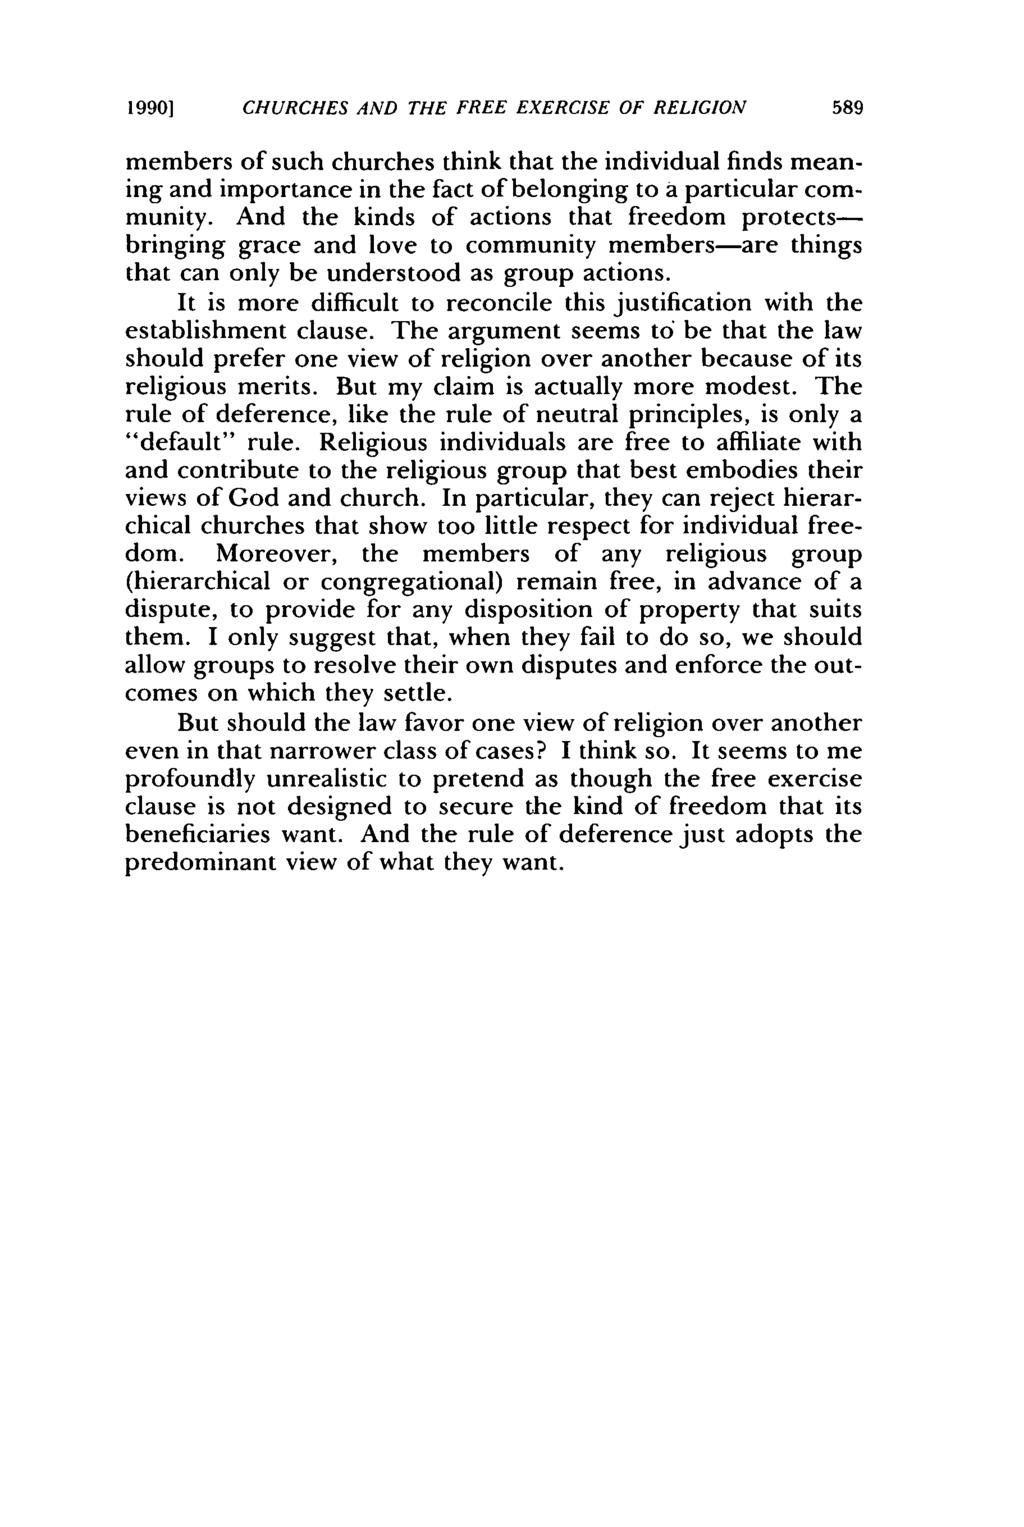 1990] CHURCHES AND THE FREE EXERCISE OF RELIGION members of such churches think that the individual finds meaning and importance in the fact of belonging to a particular community.